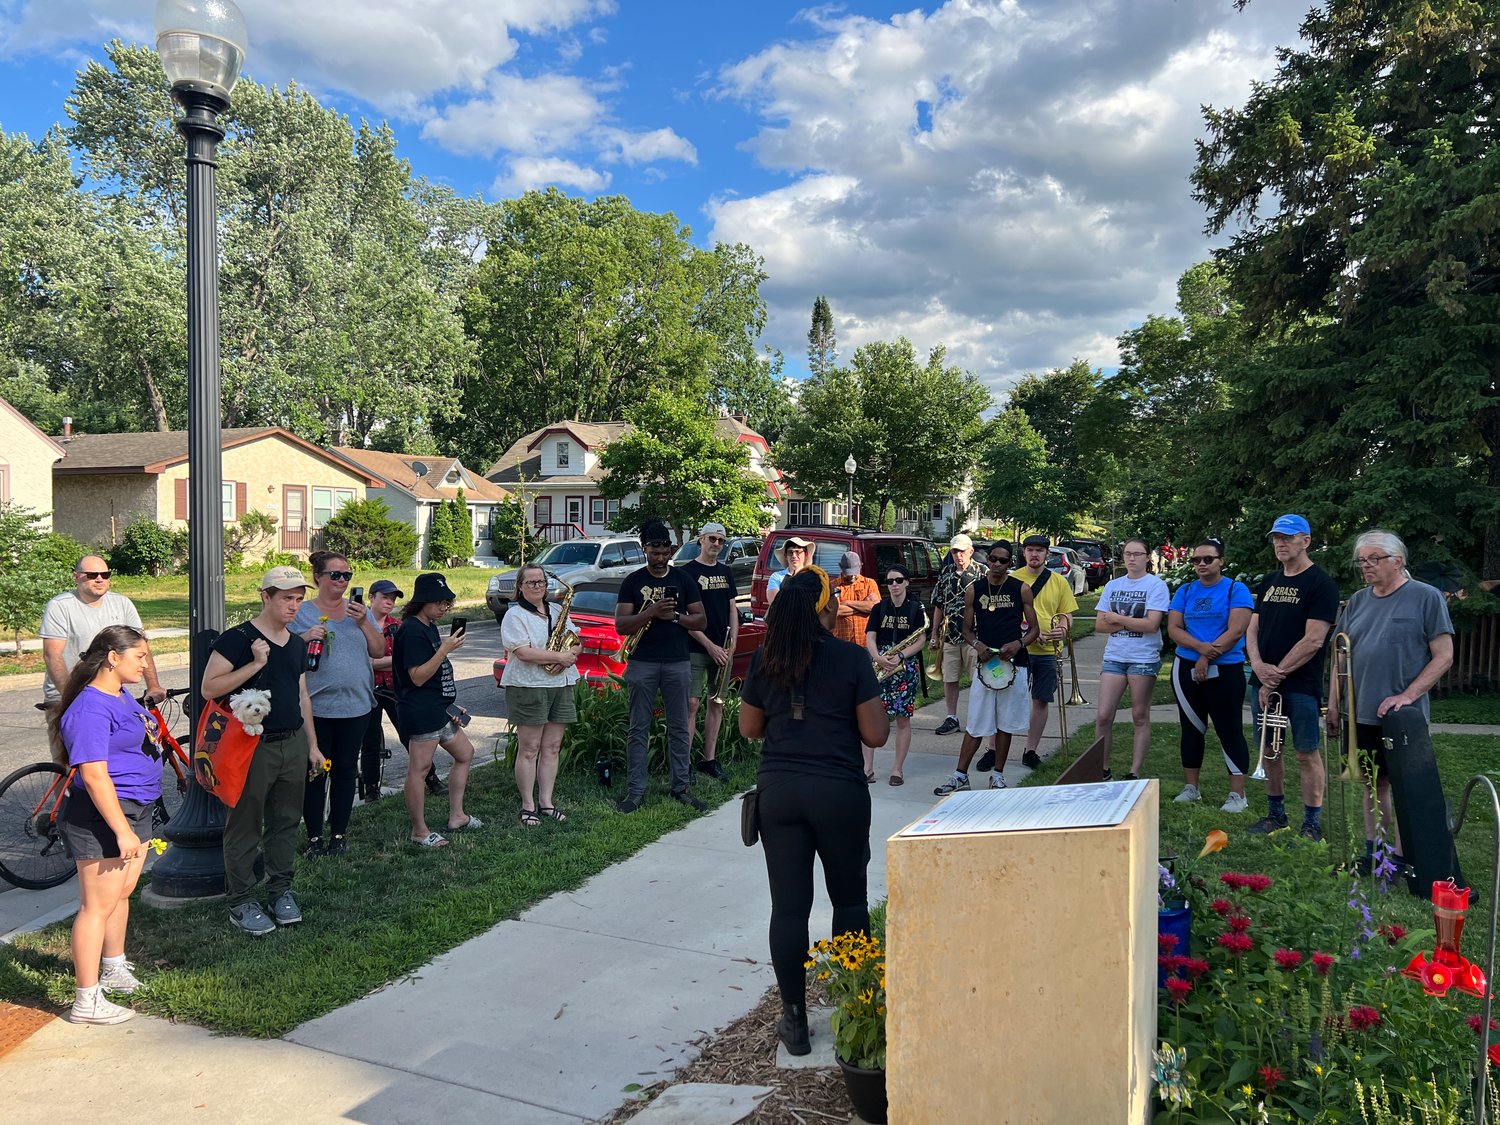 Marcia Howard shares the history of the Arthur and Edith Lee house at 4600 Columbus. She pointed out that the group assembled on July 11 was nothing like the angry white mob that gathered there in 1931. (Jill Boogren)